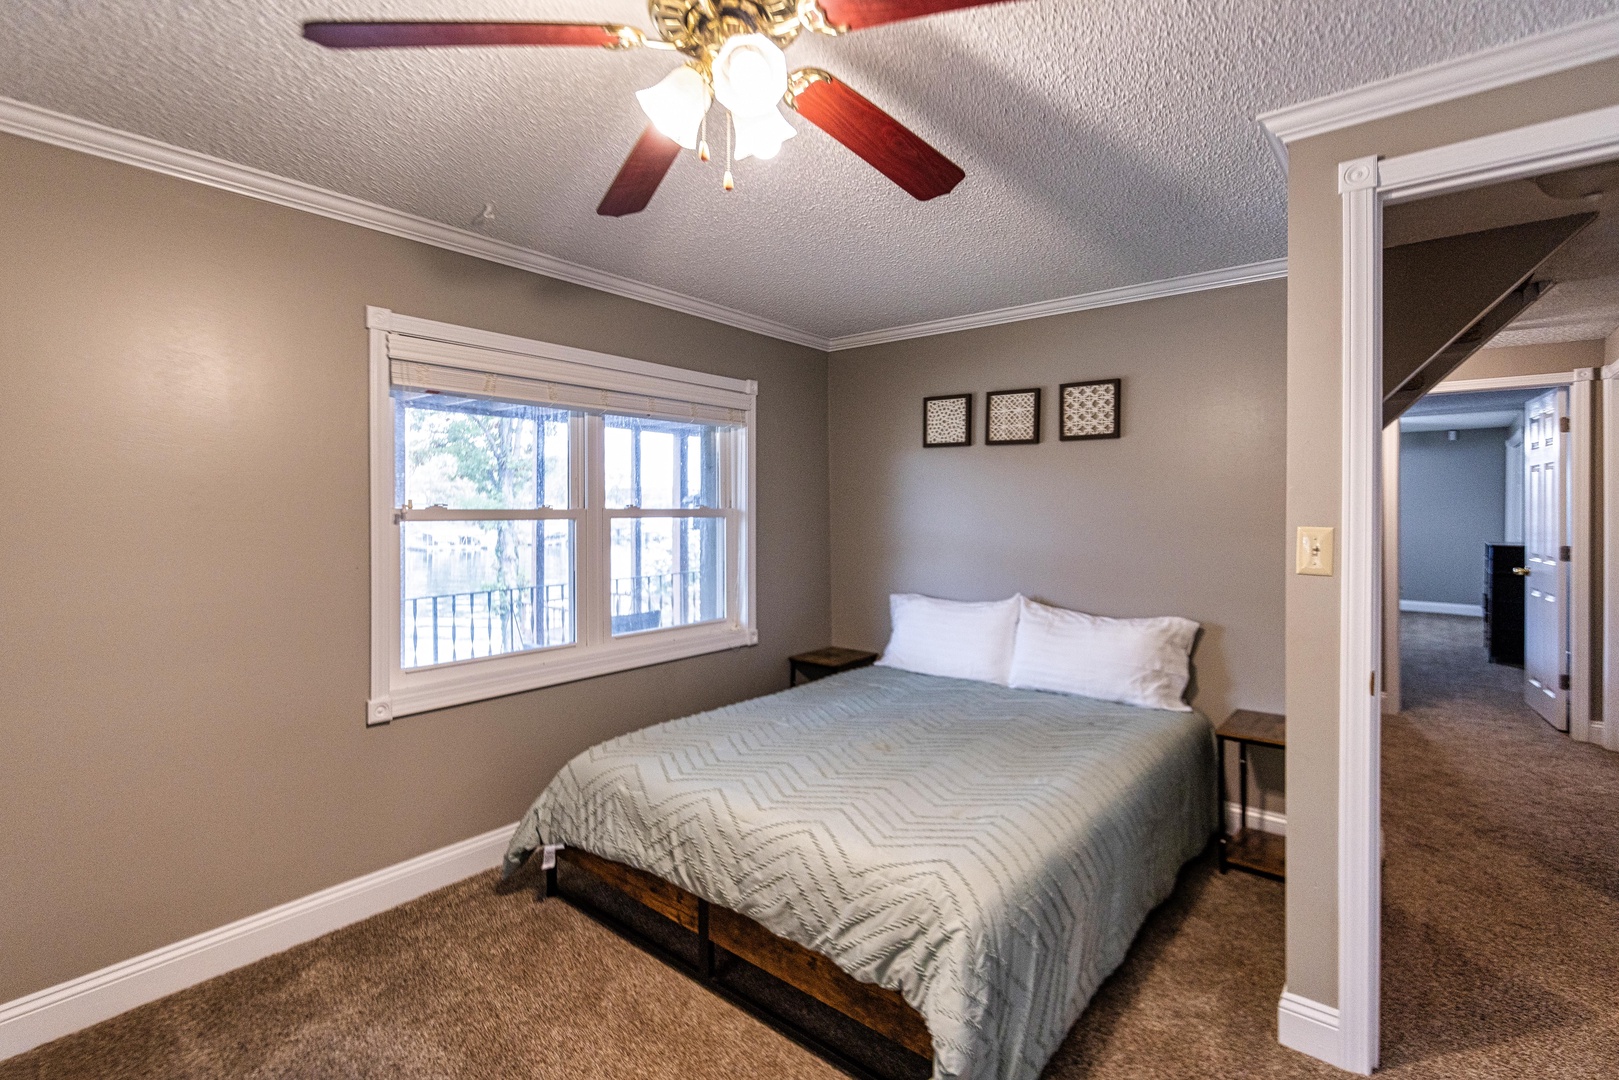 The 1st of 3 lower-level bedrooms offers a queen bed & loads of storage space